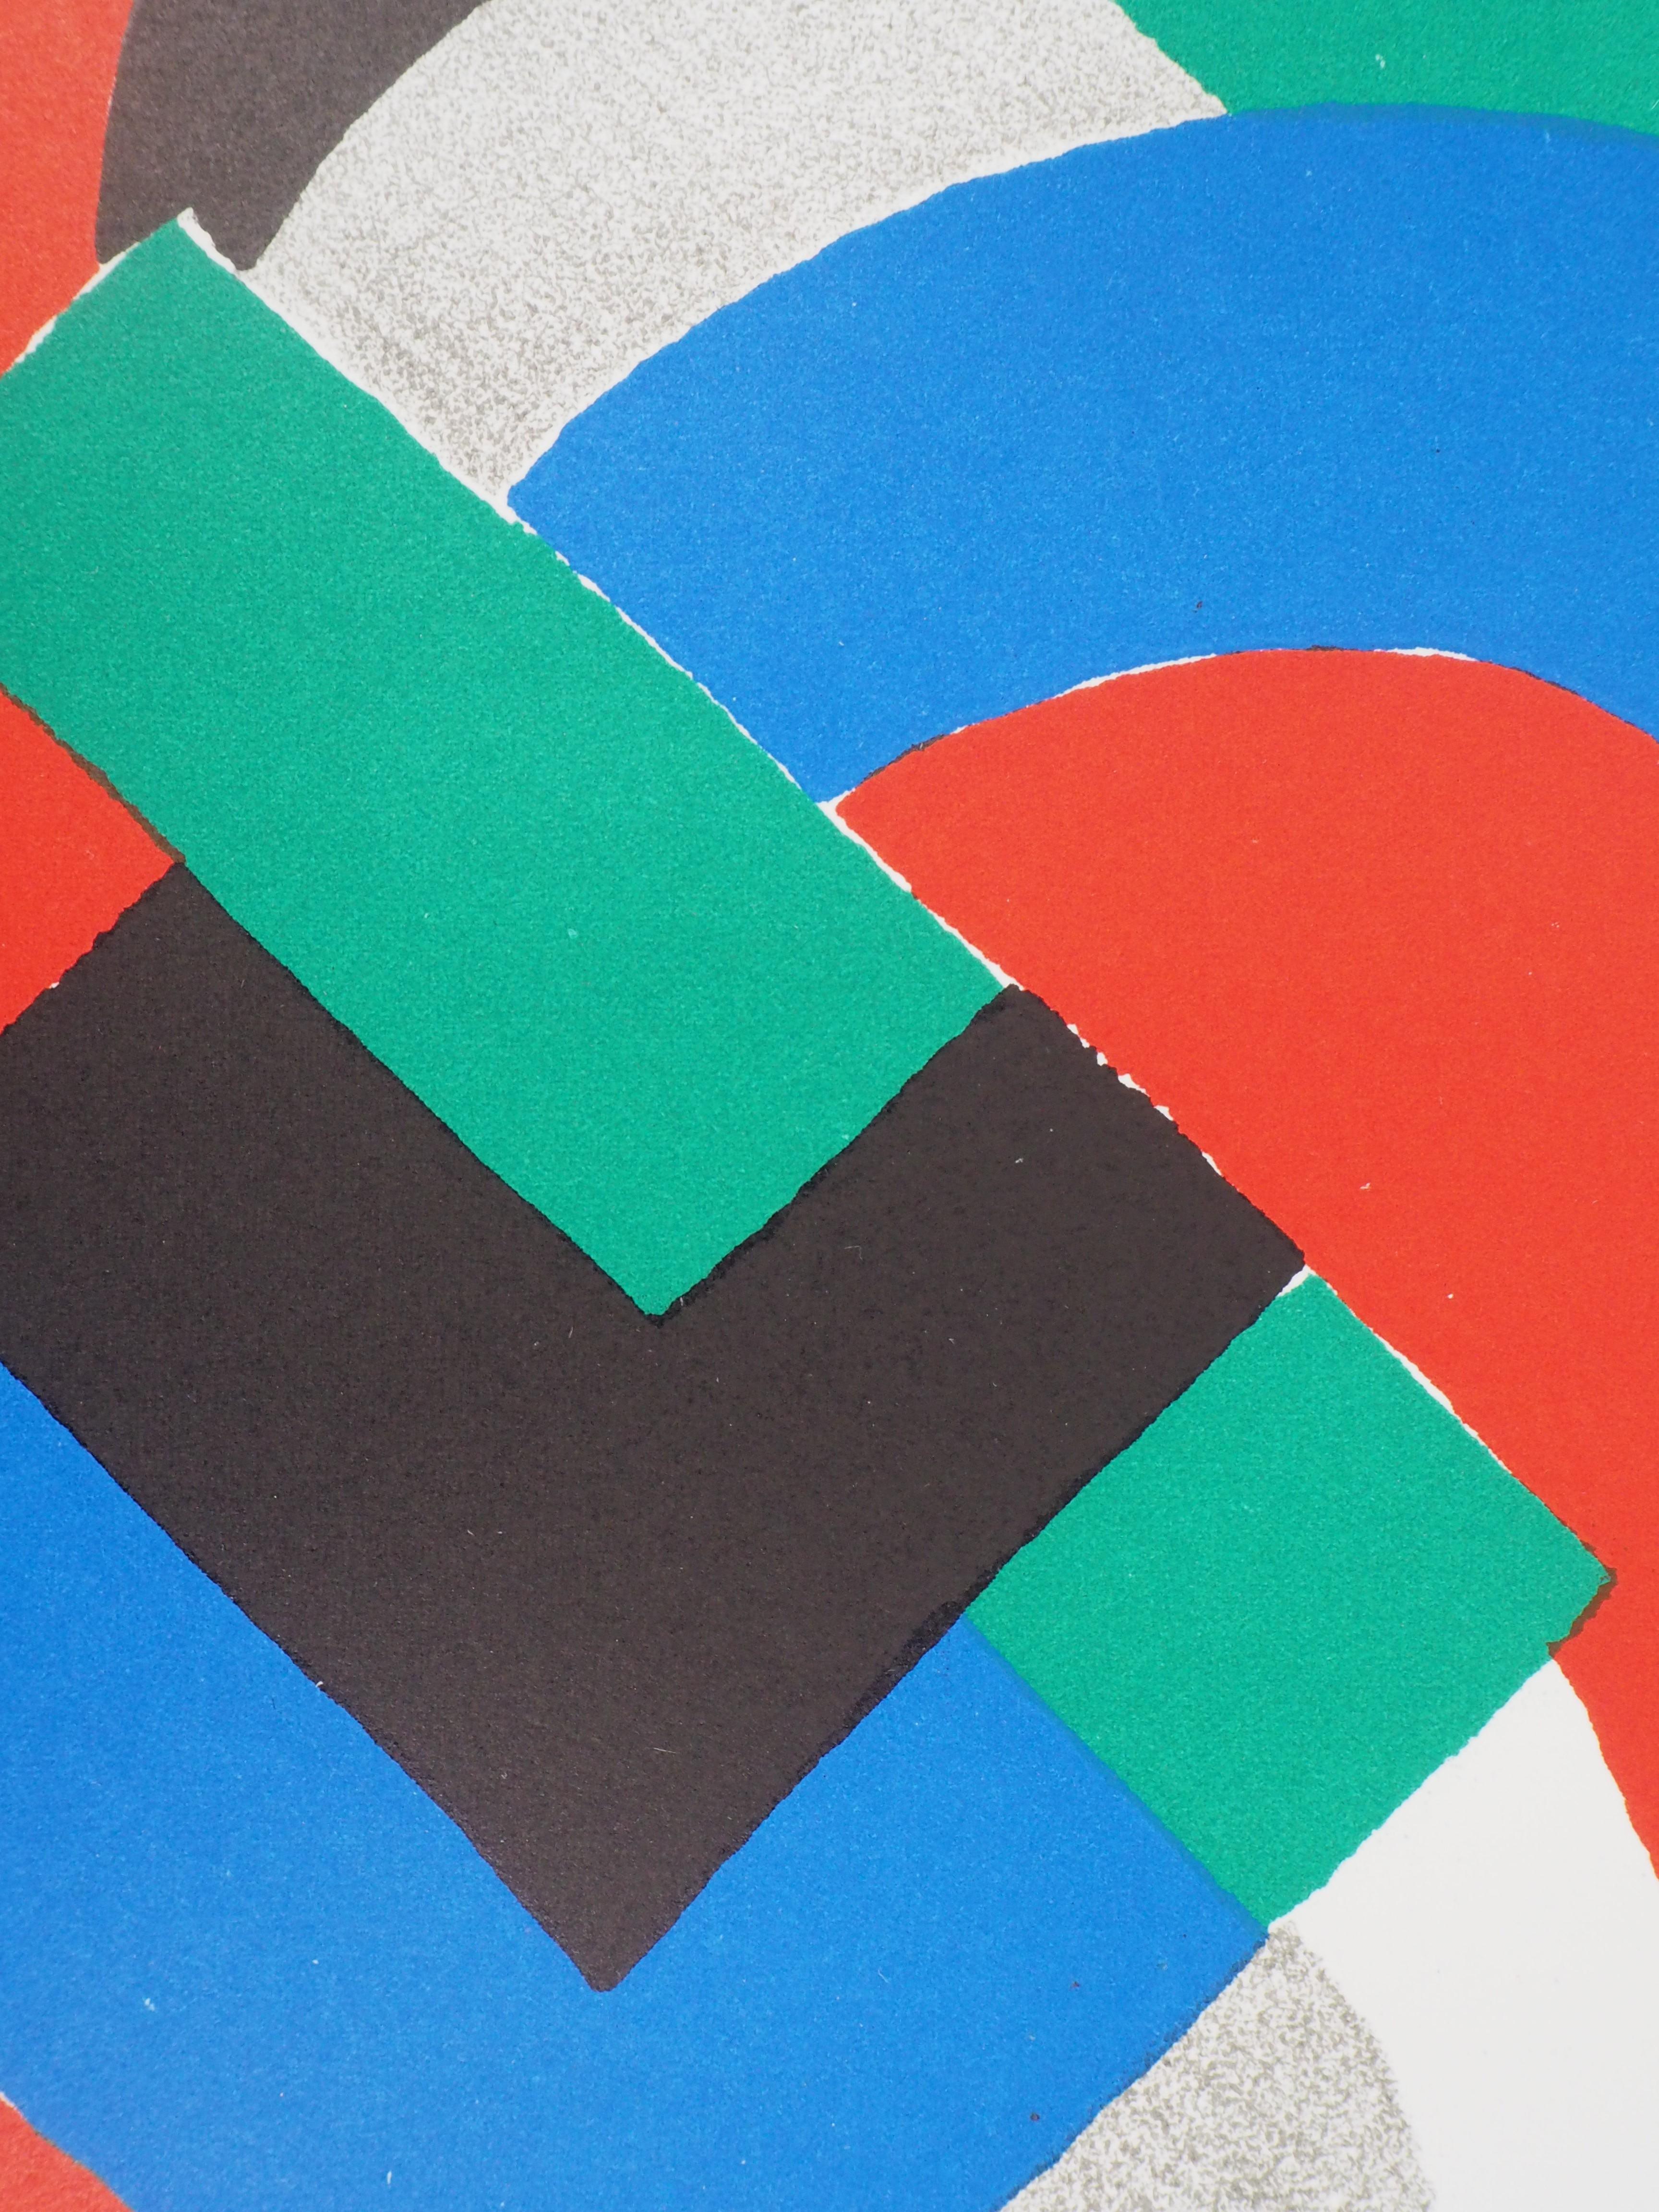 Composition in Green, Blue and Red - Original lithograph (Mourlot 1969) - Abstract Geometric Print by Sonia Delaunay